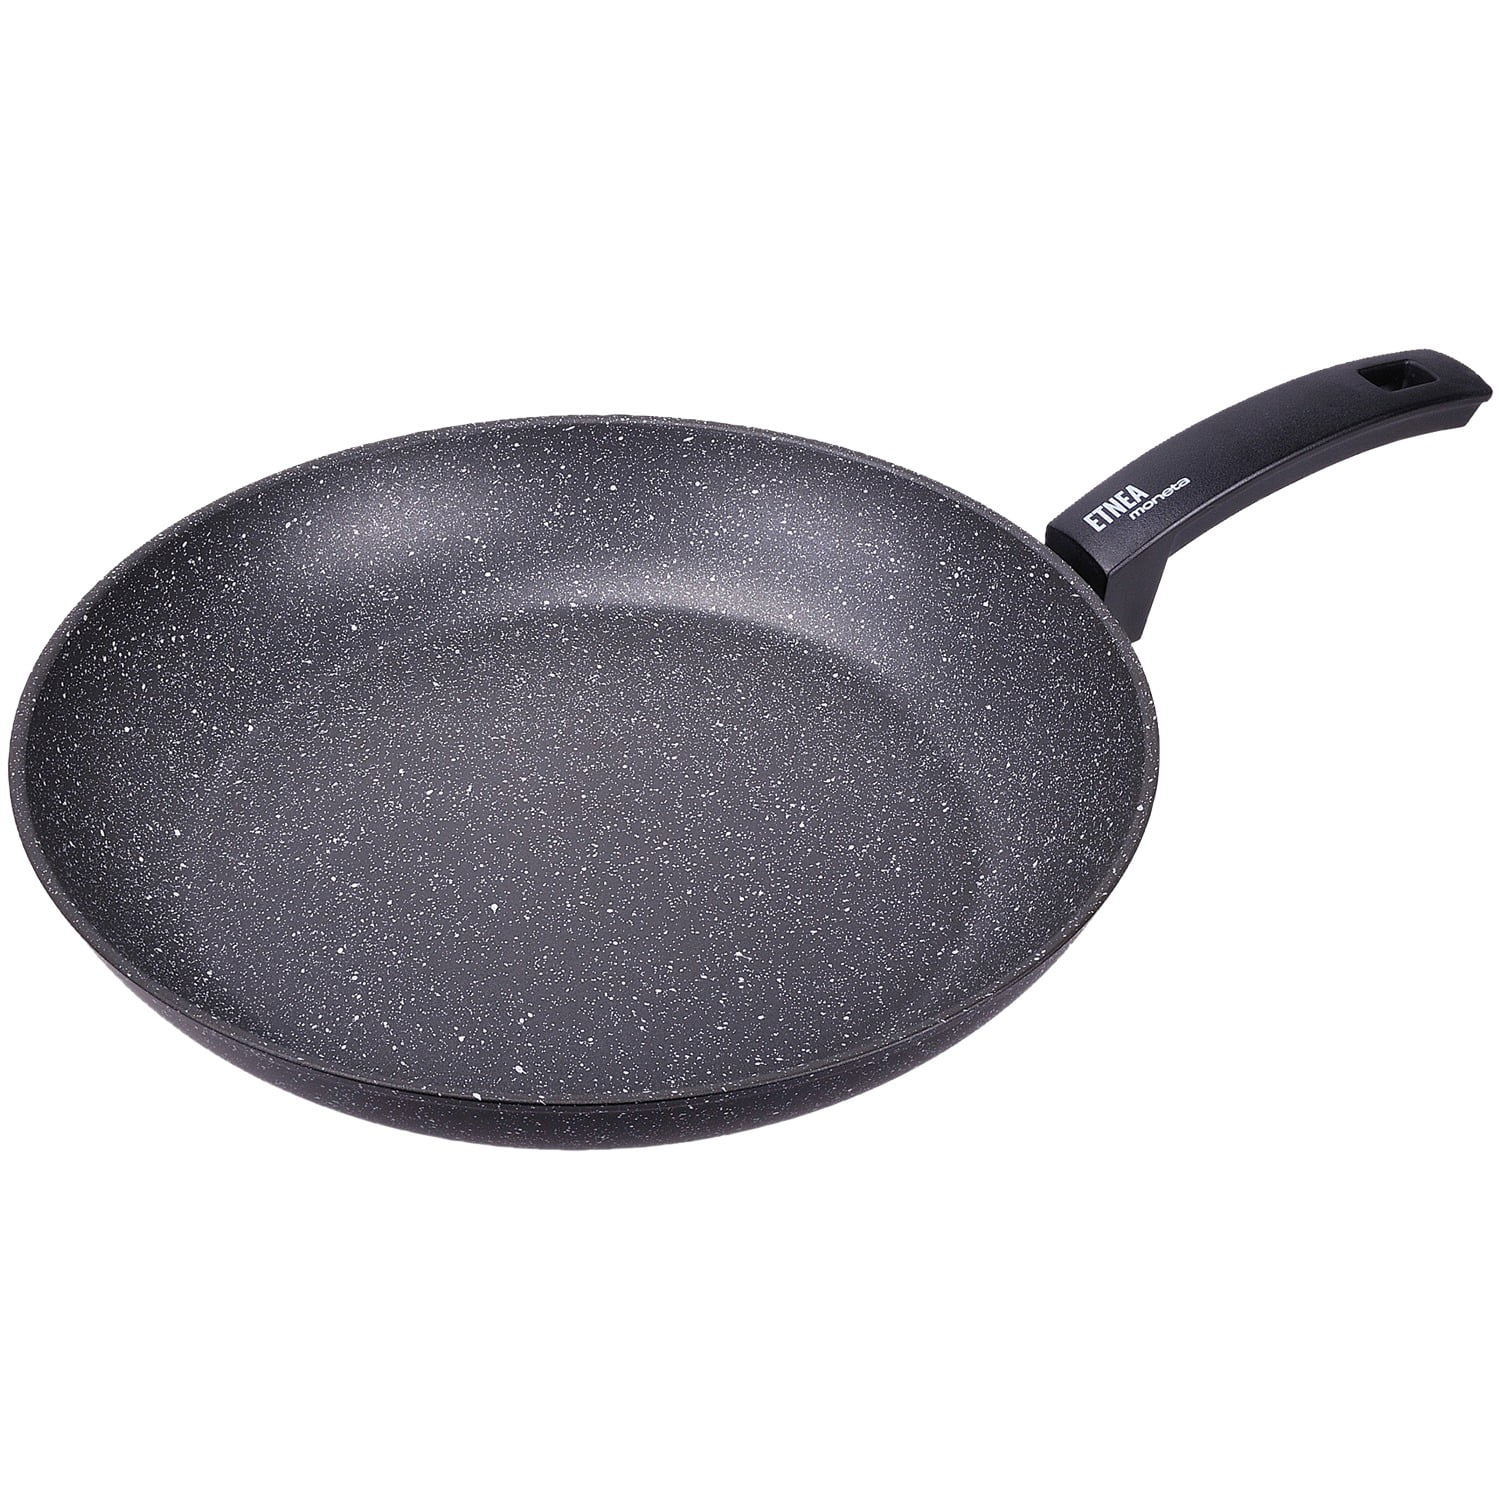  Onyx Cookware Padelle